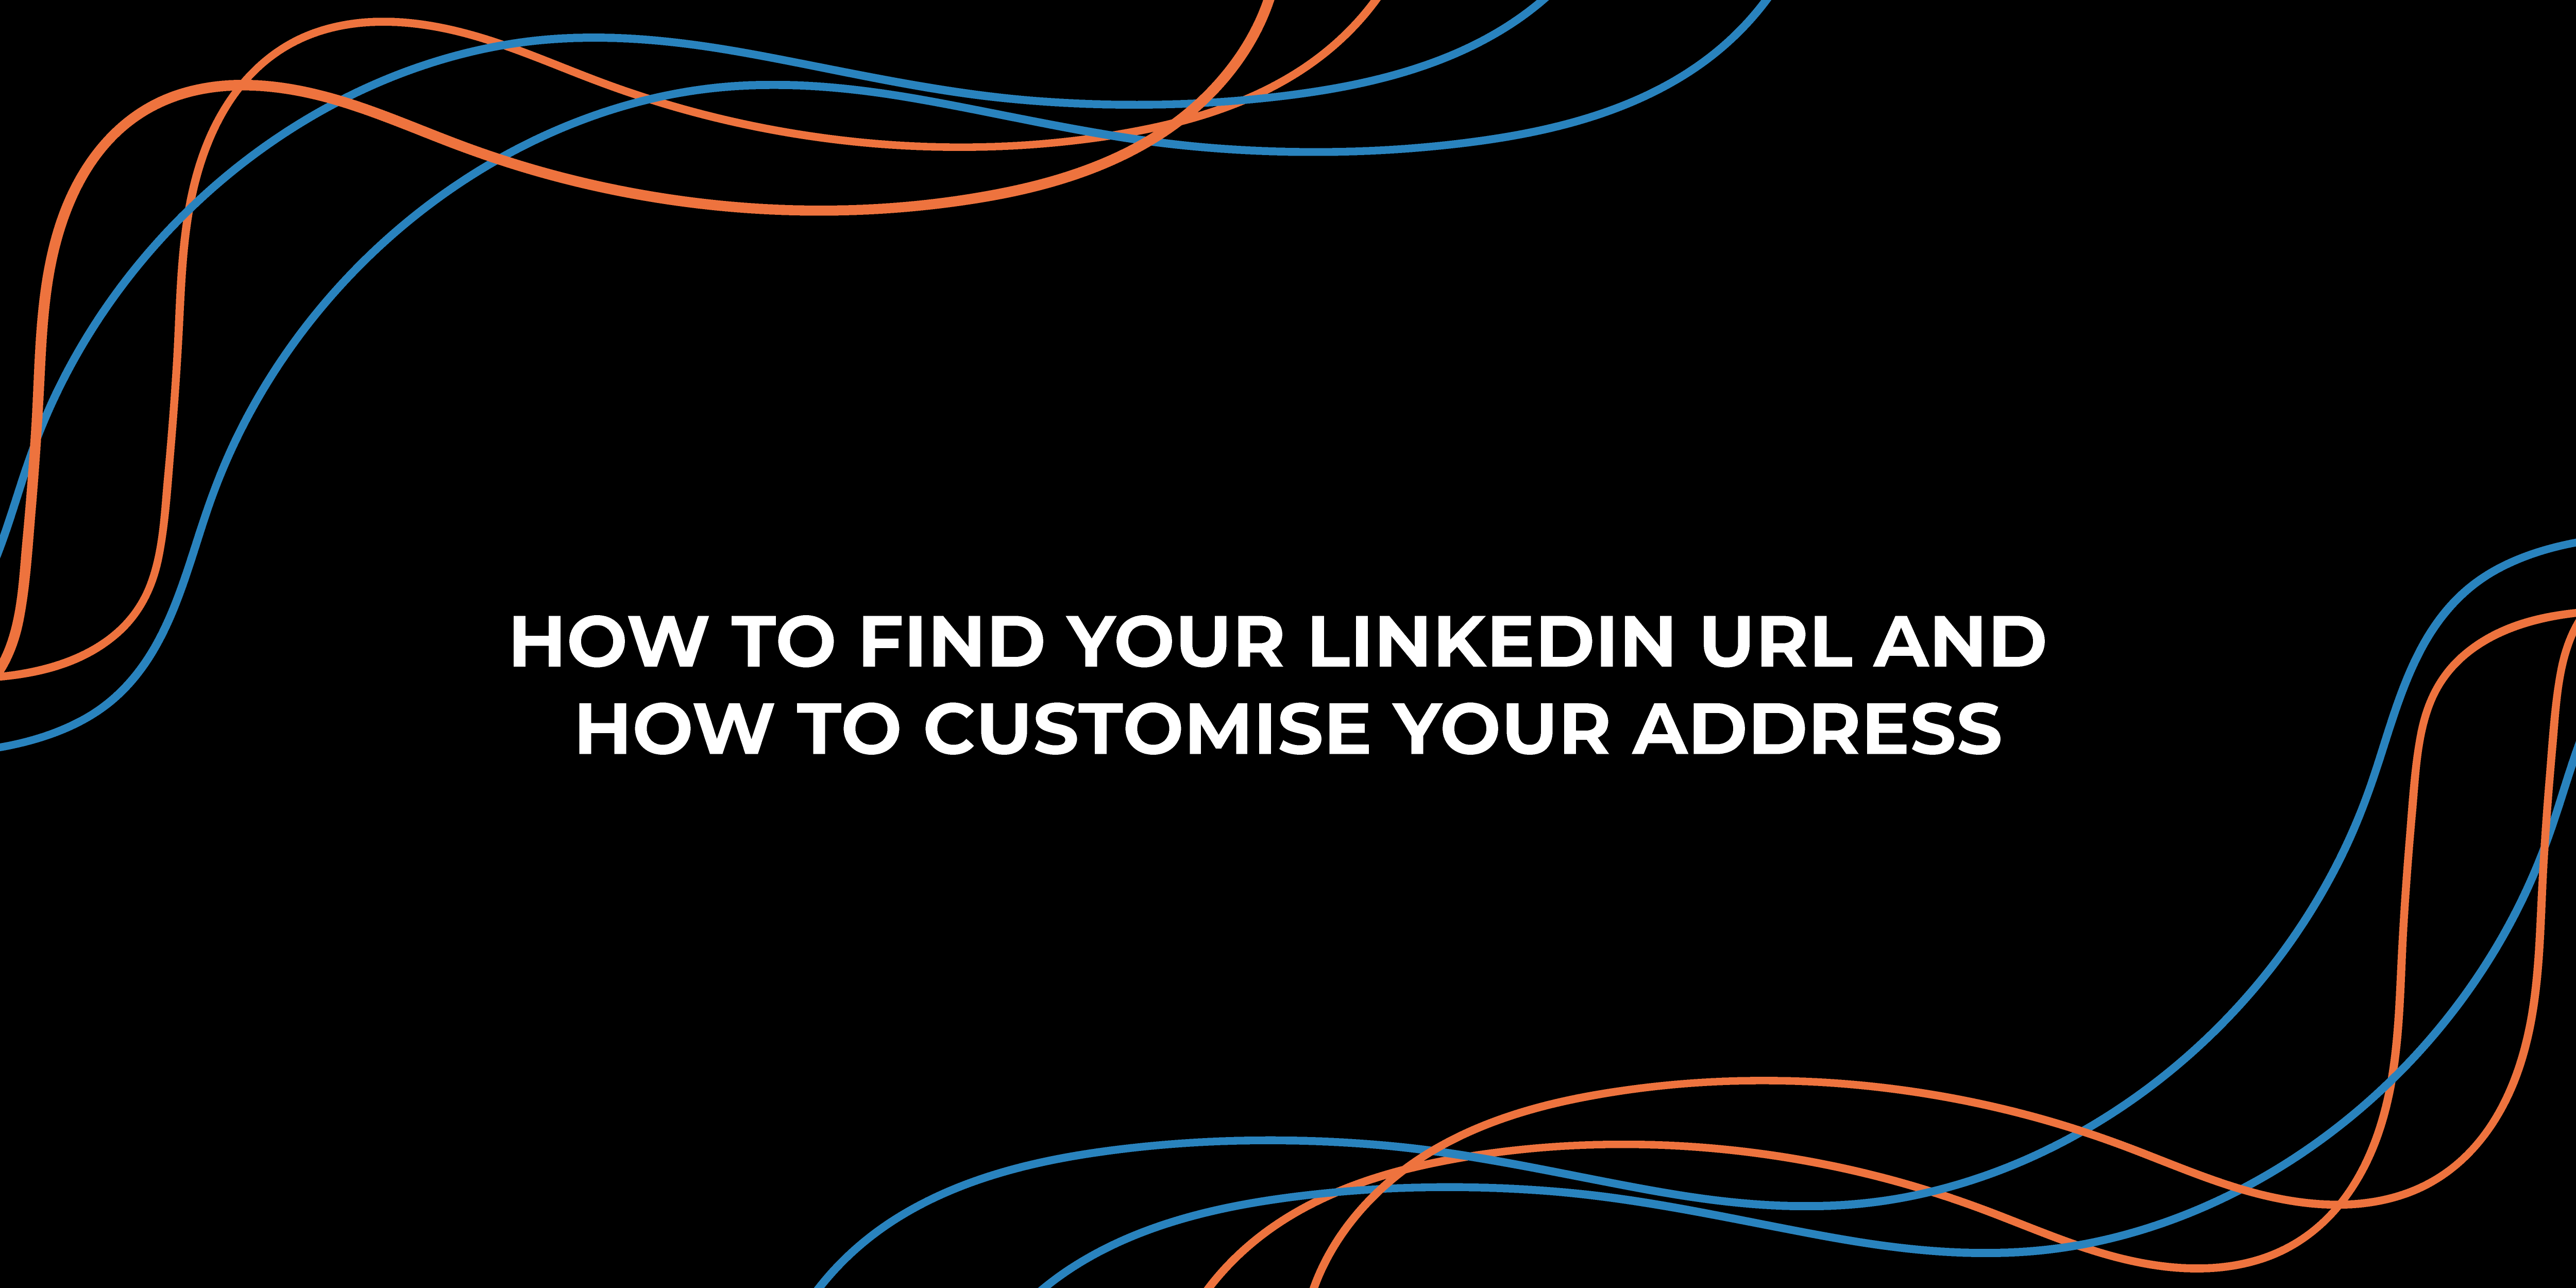 How to find your LinkedIn URL and how to customise your address